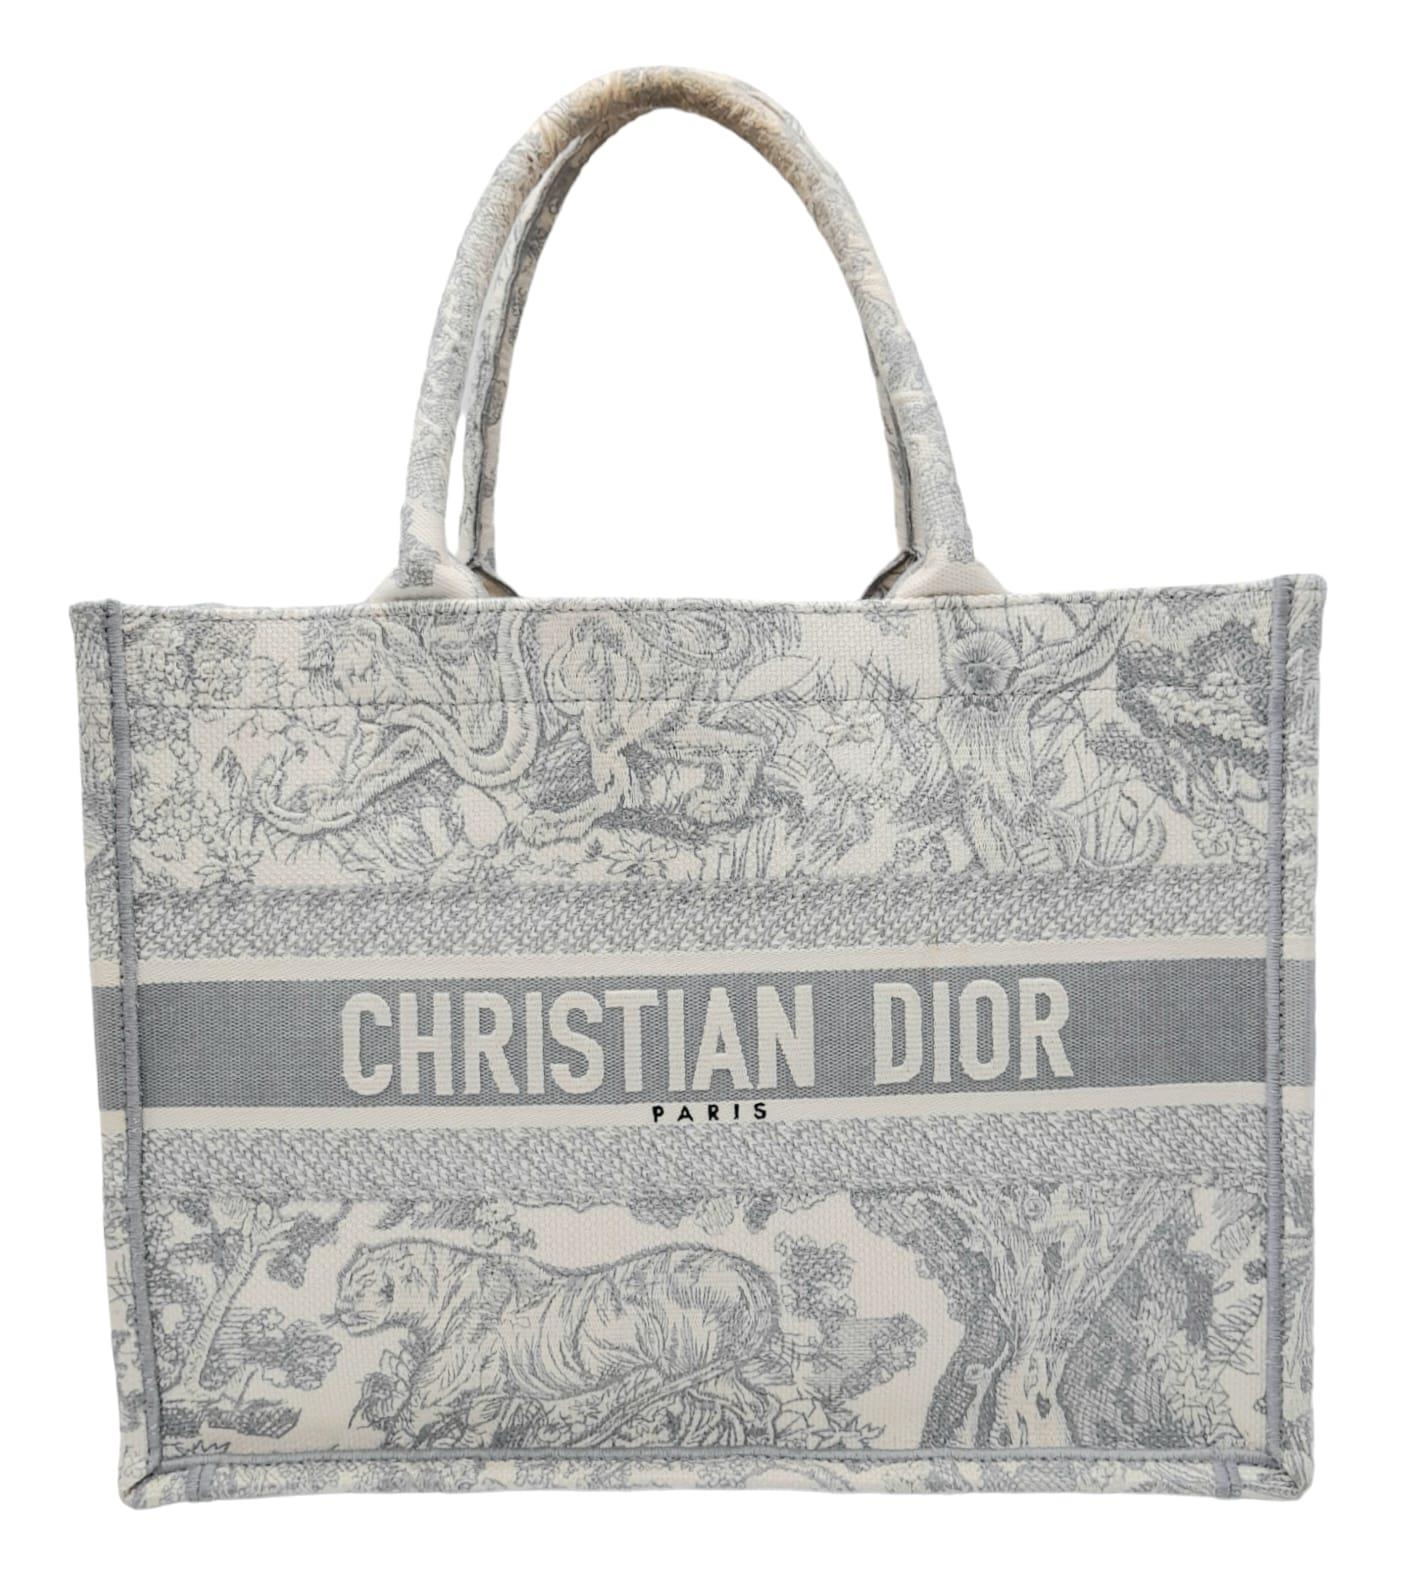 A Christian Dior small toile de jouy book tote bag, grey/white embroidery, top handles. Size approx.